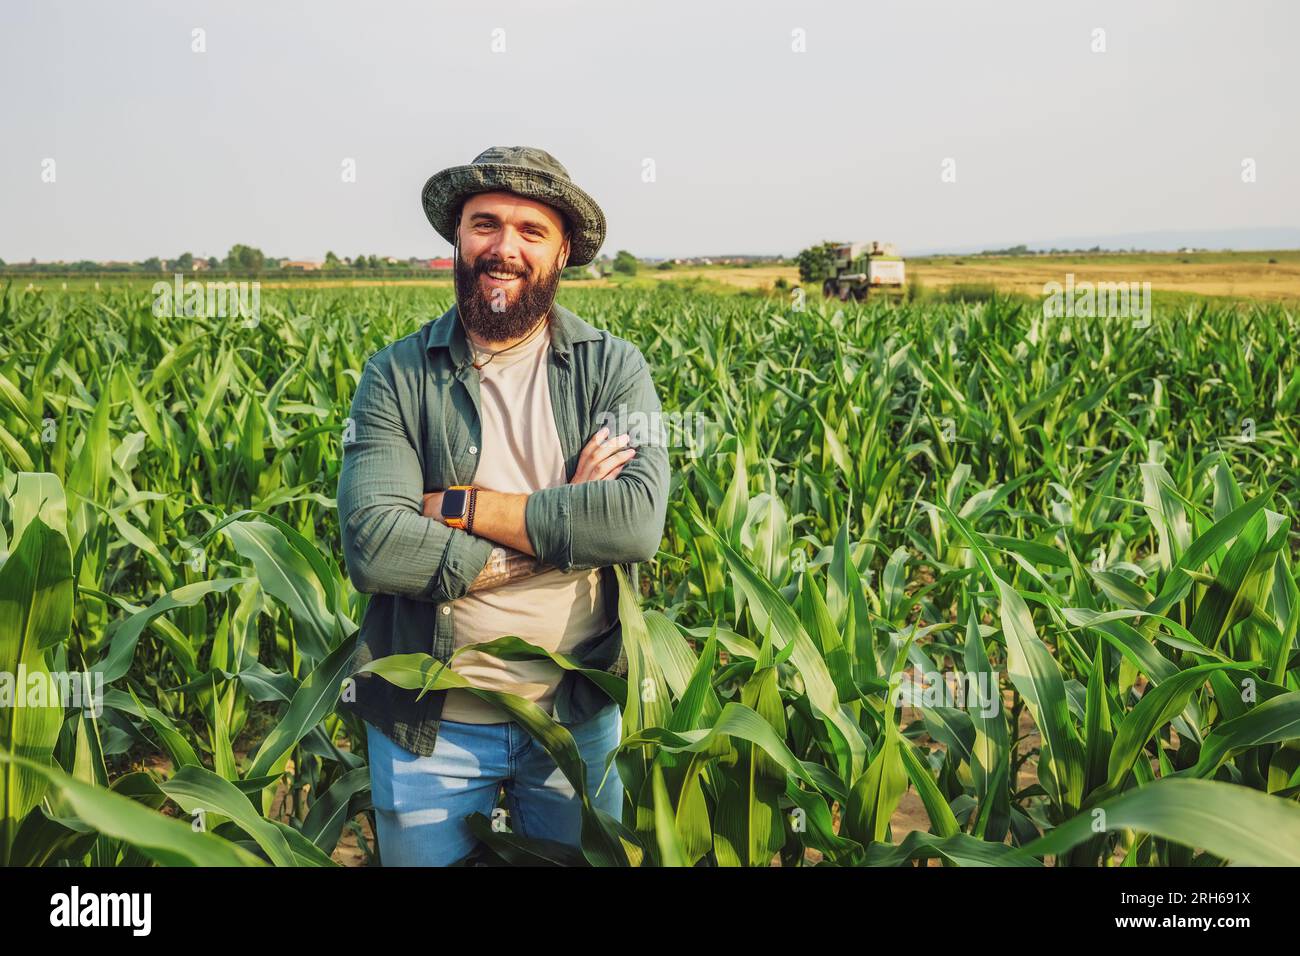 Portrait of farmer who is cultivating corn. Agricultural occupation. Stock Photo